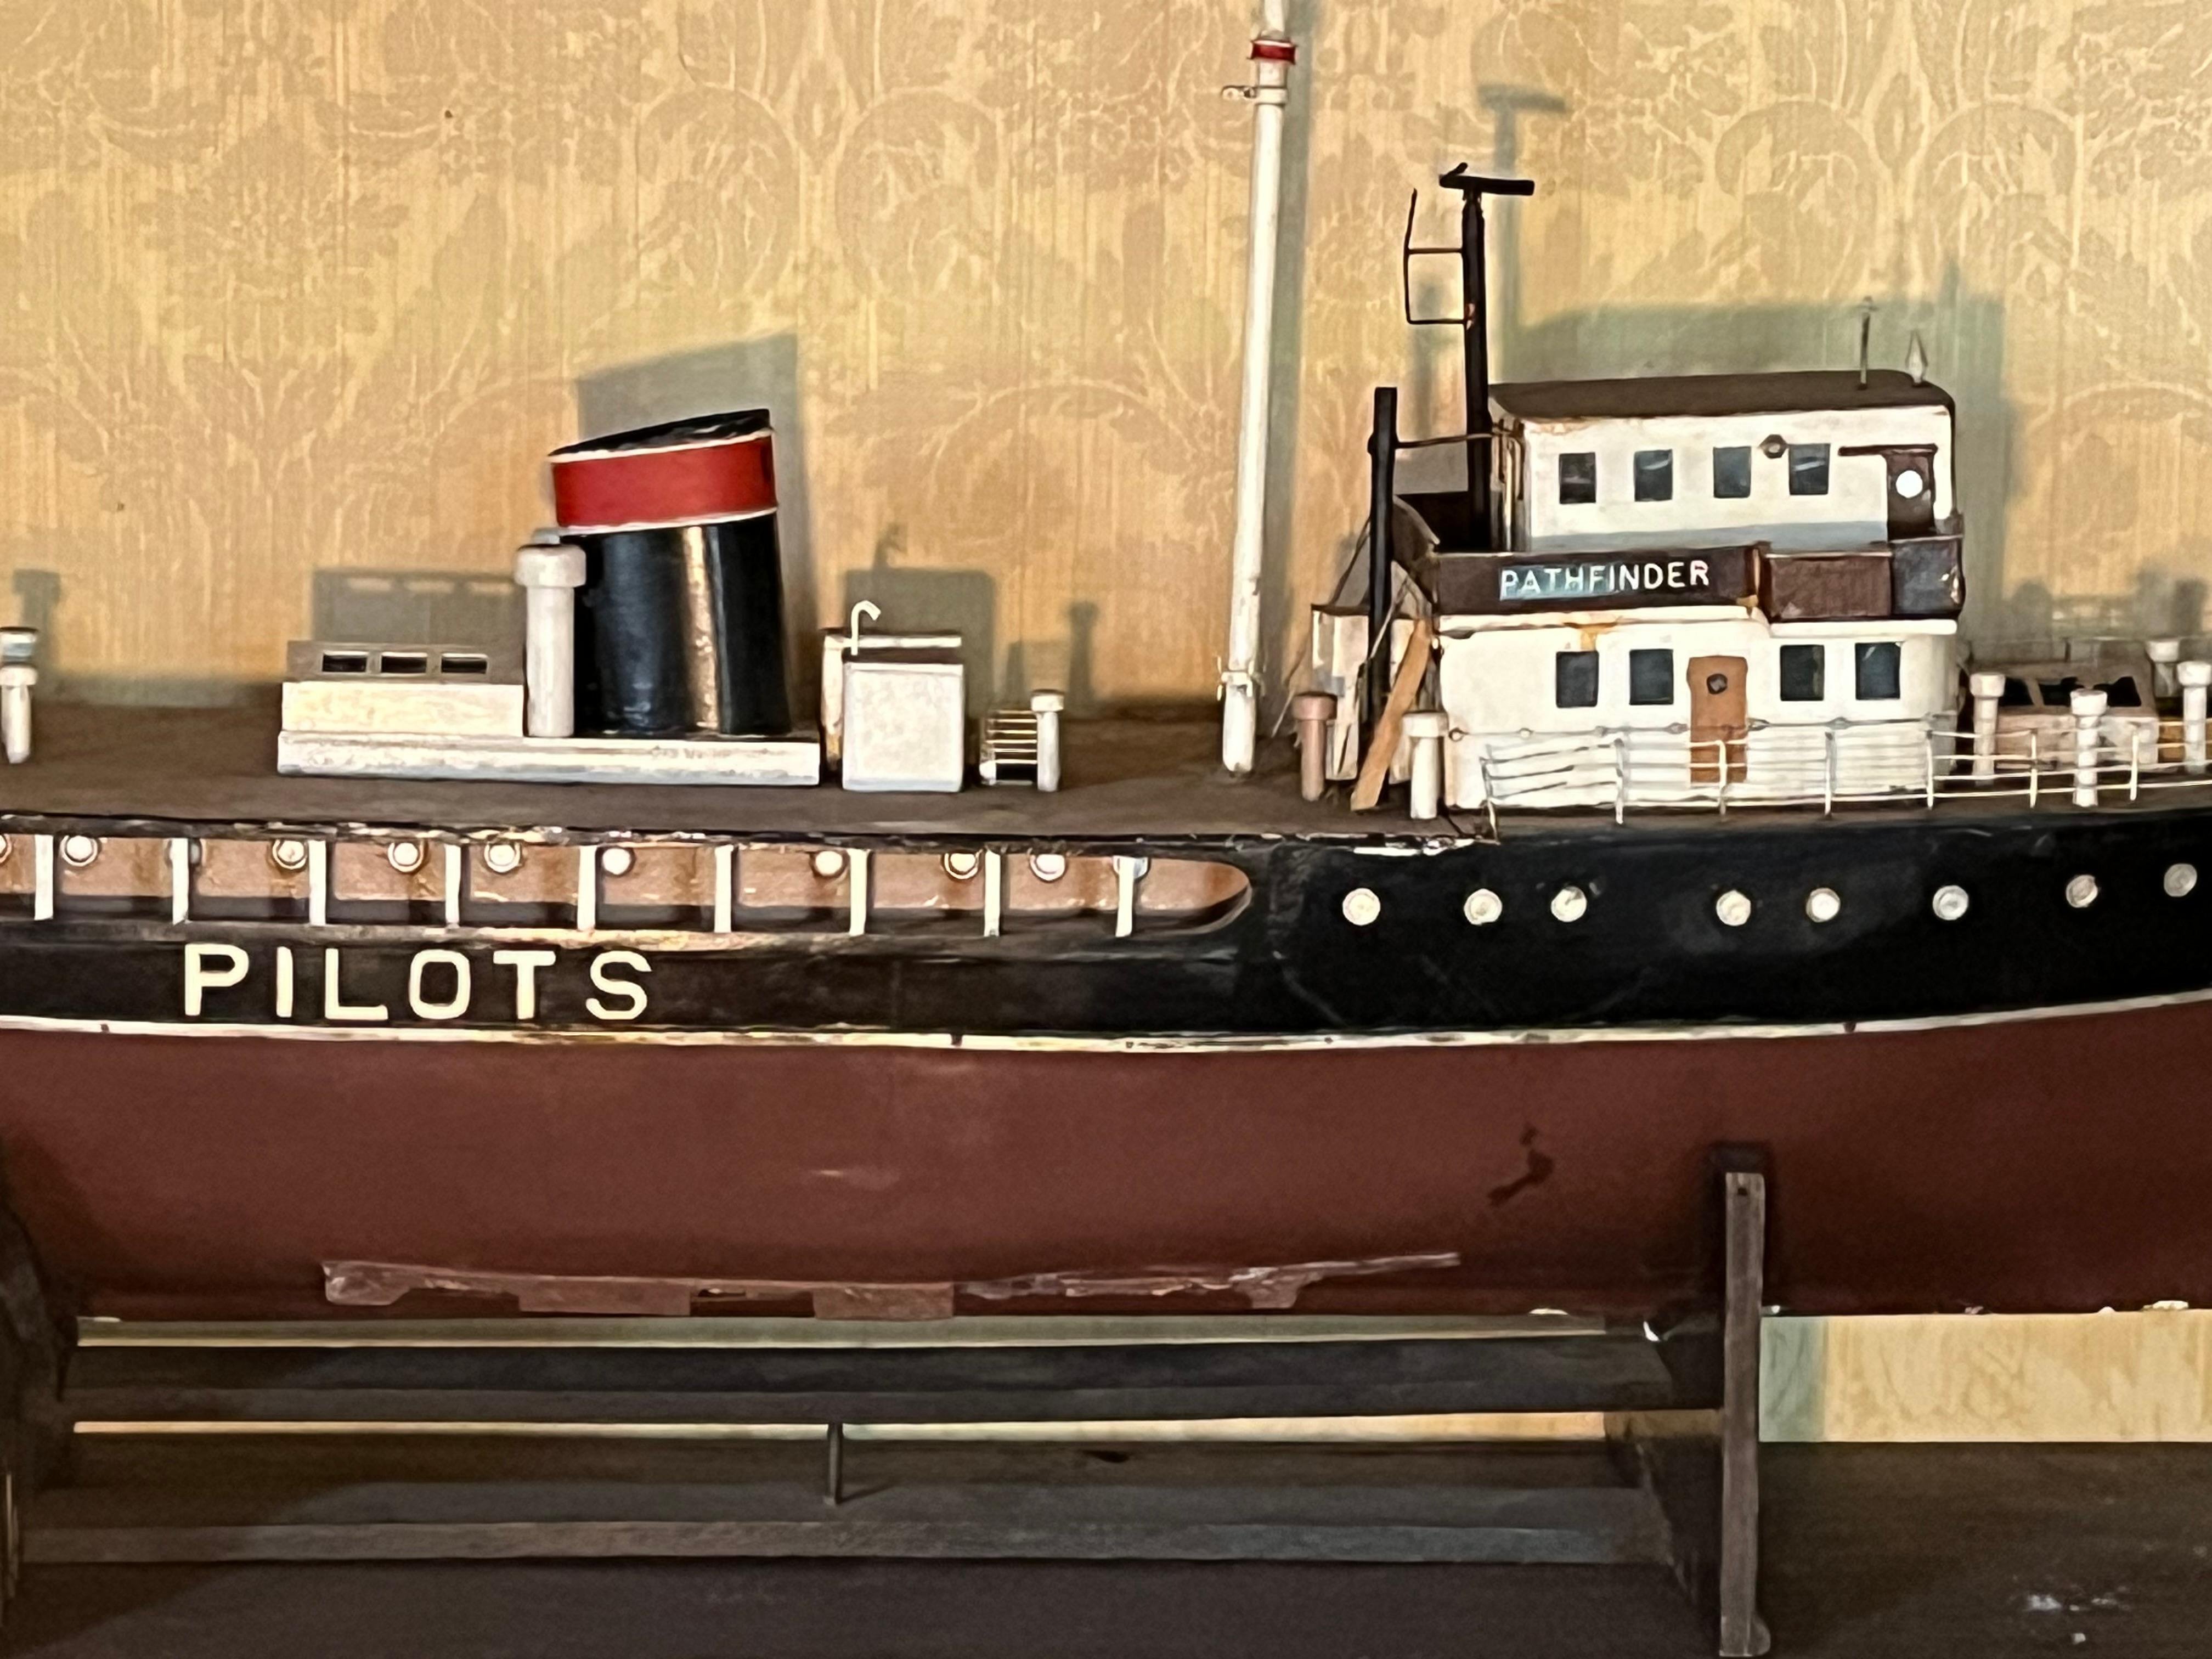 Other Model of a Pilot Ship For Sale